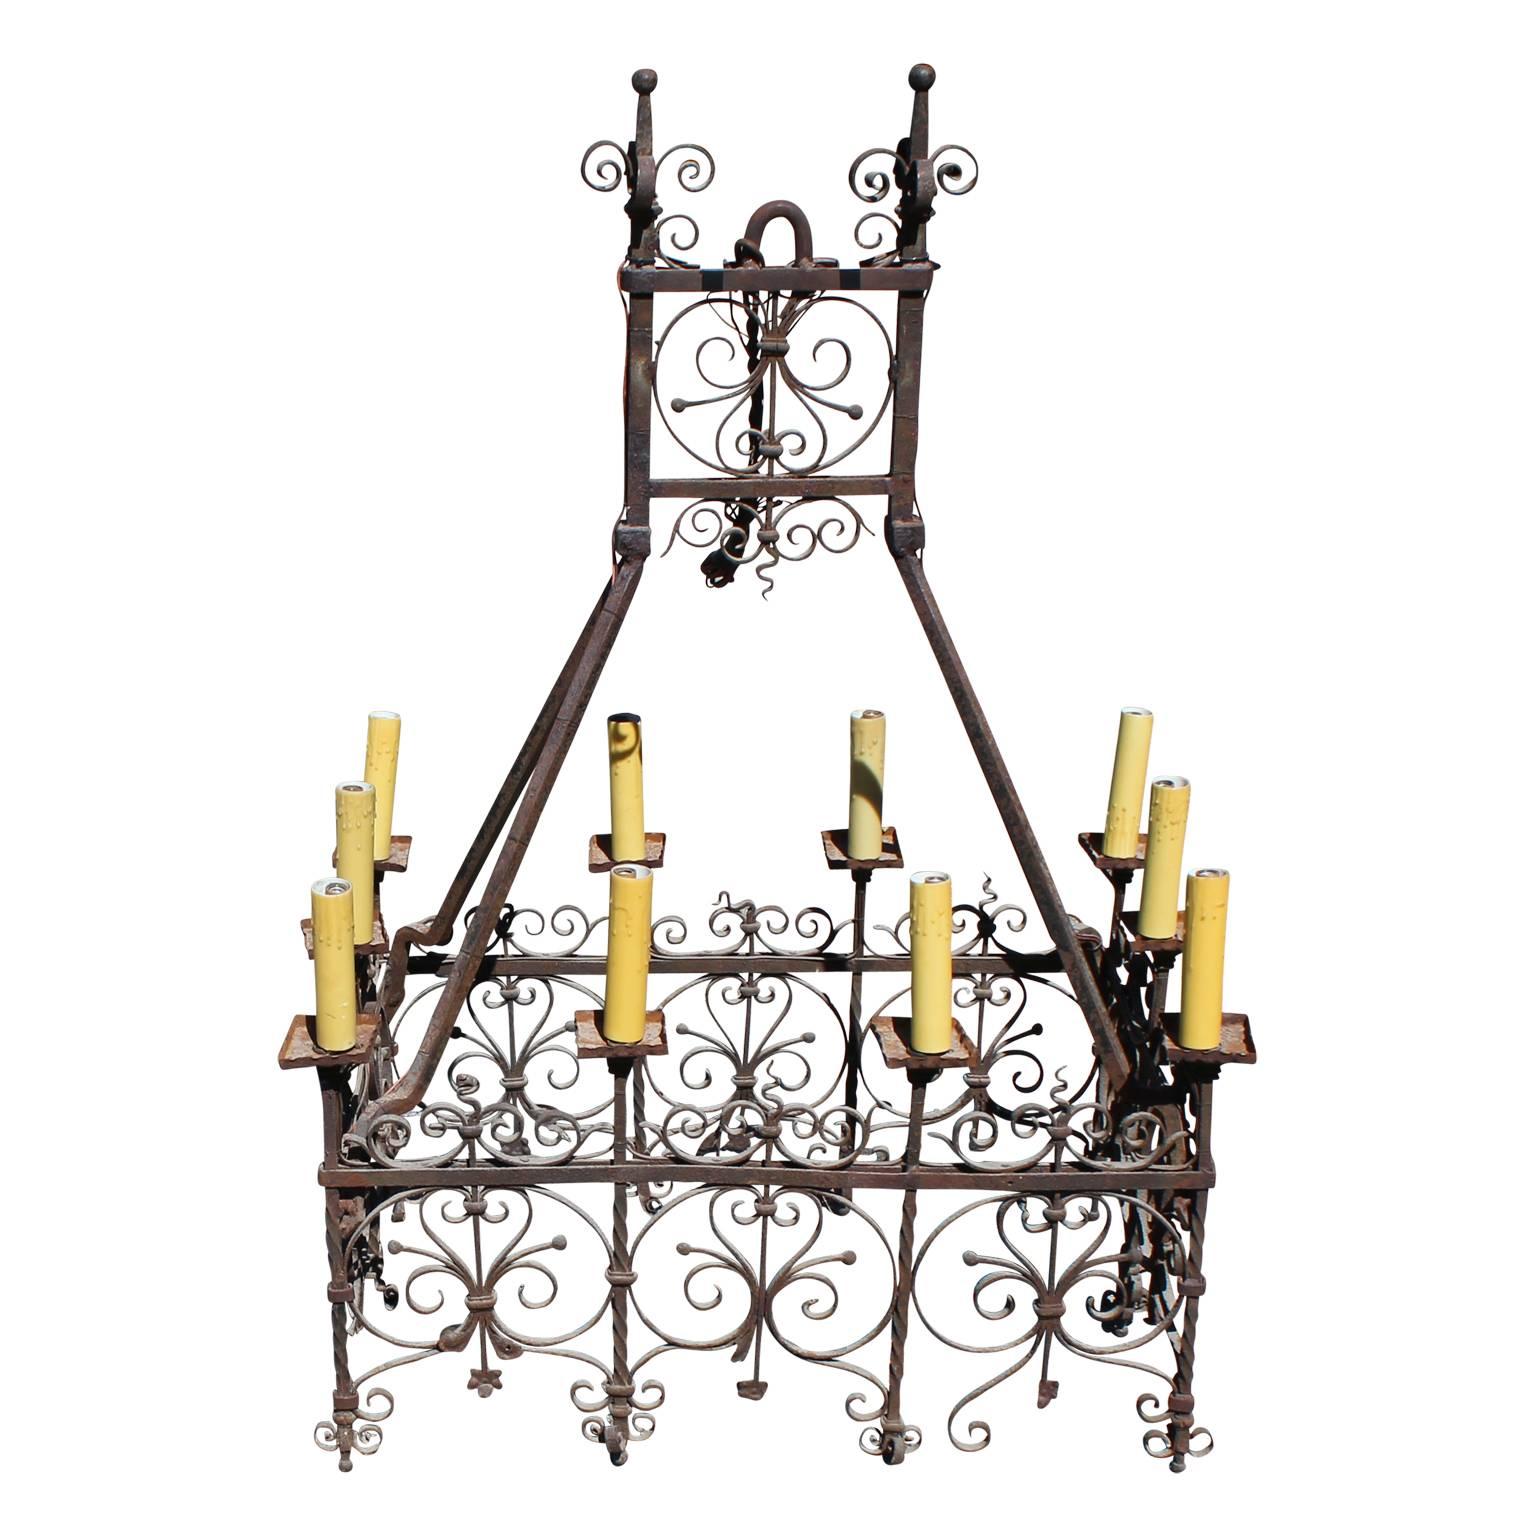 Wonderful 18th Century Spanish or French Hand Wrought Iron Chandelier